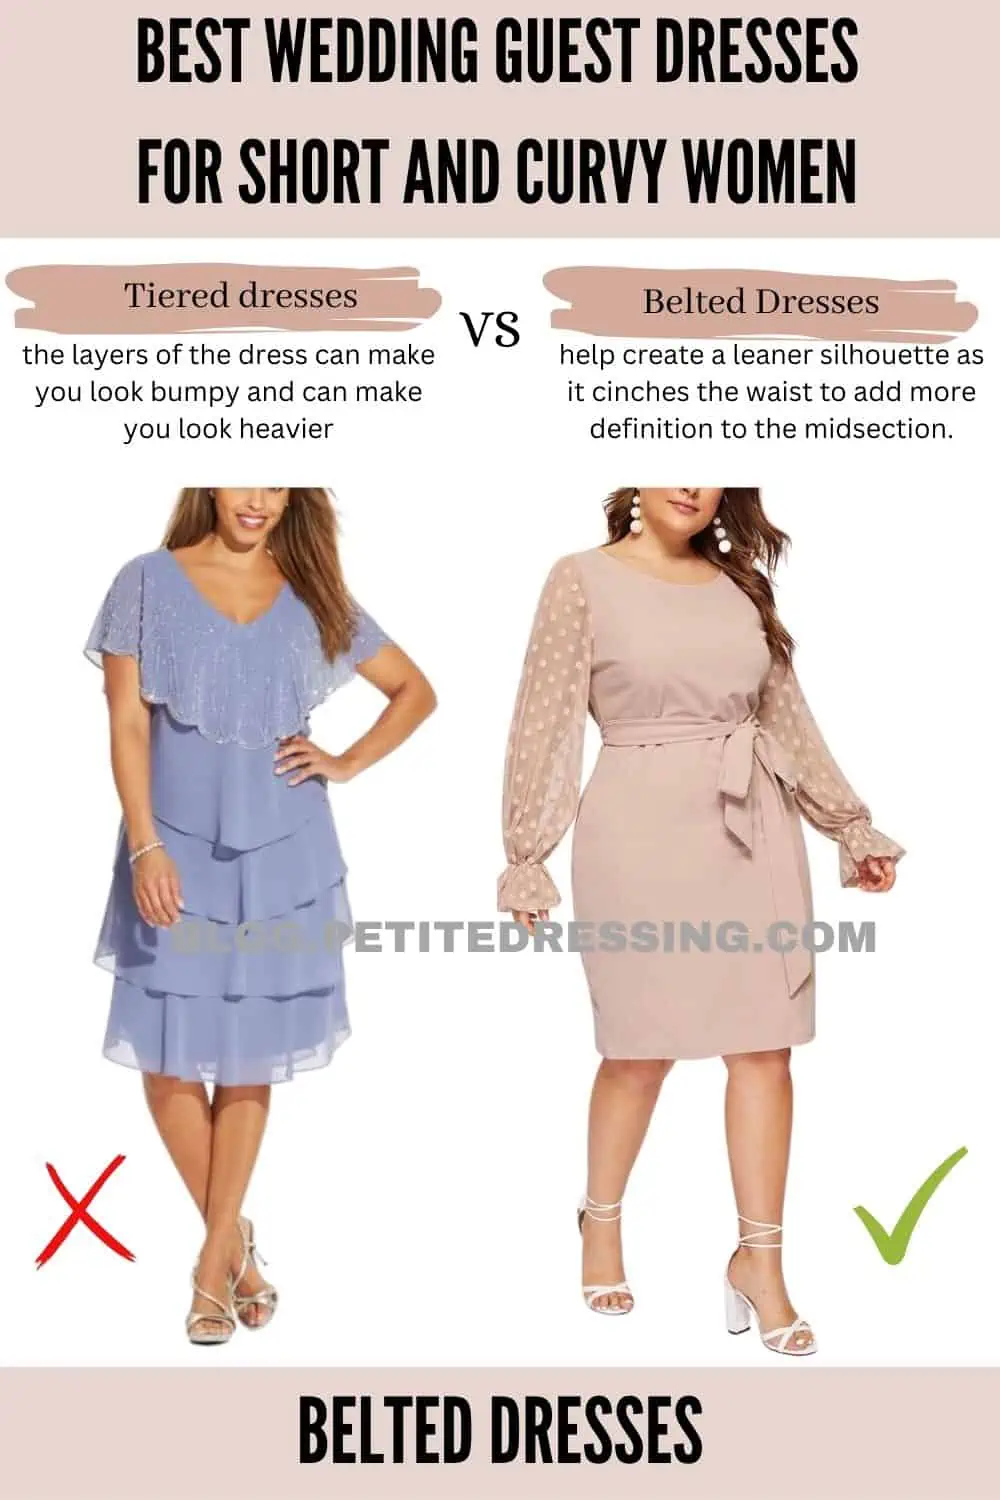 Wedding Guest Dresses Guide for Short and Curvy Women - Petite